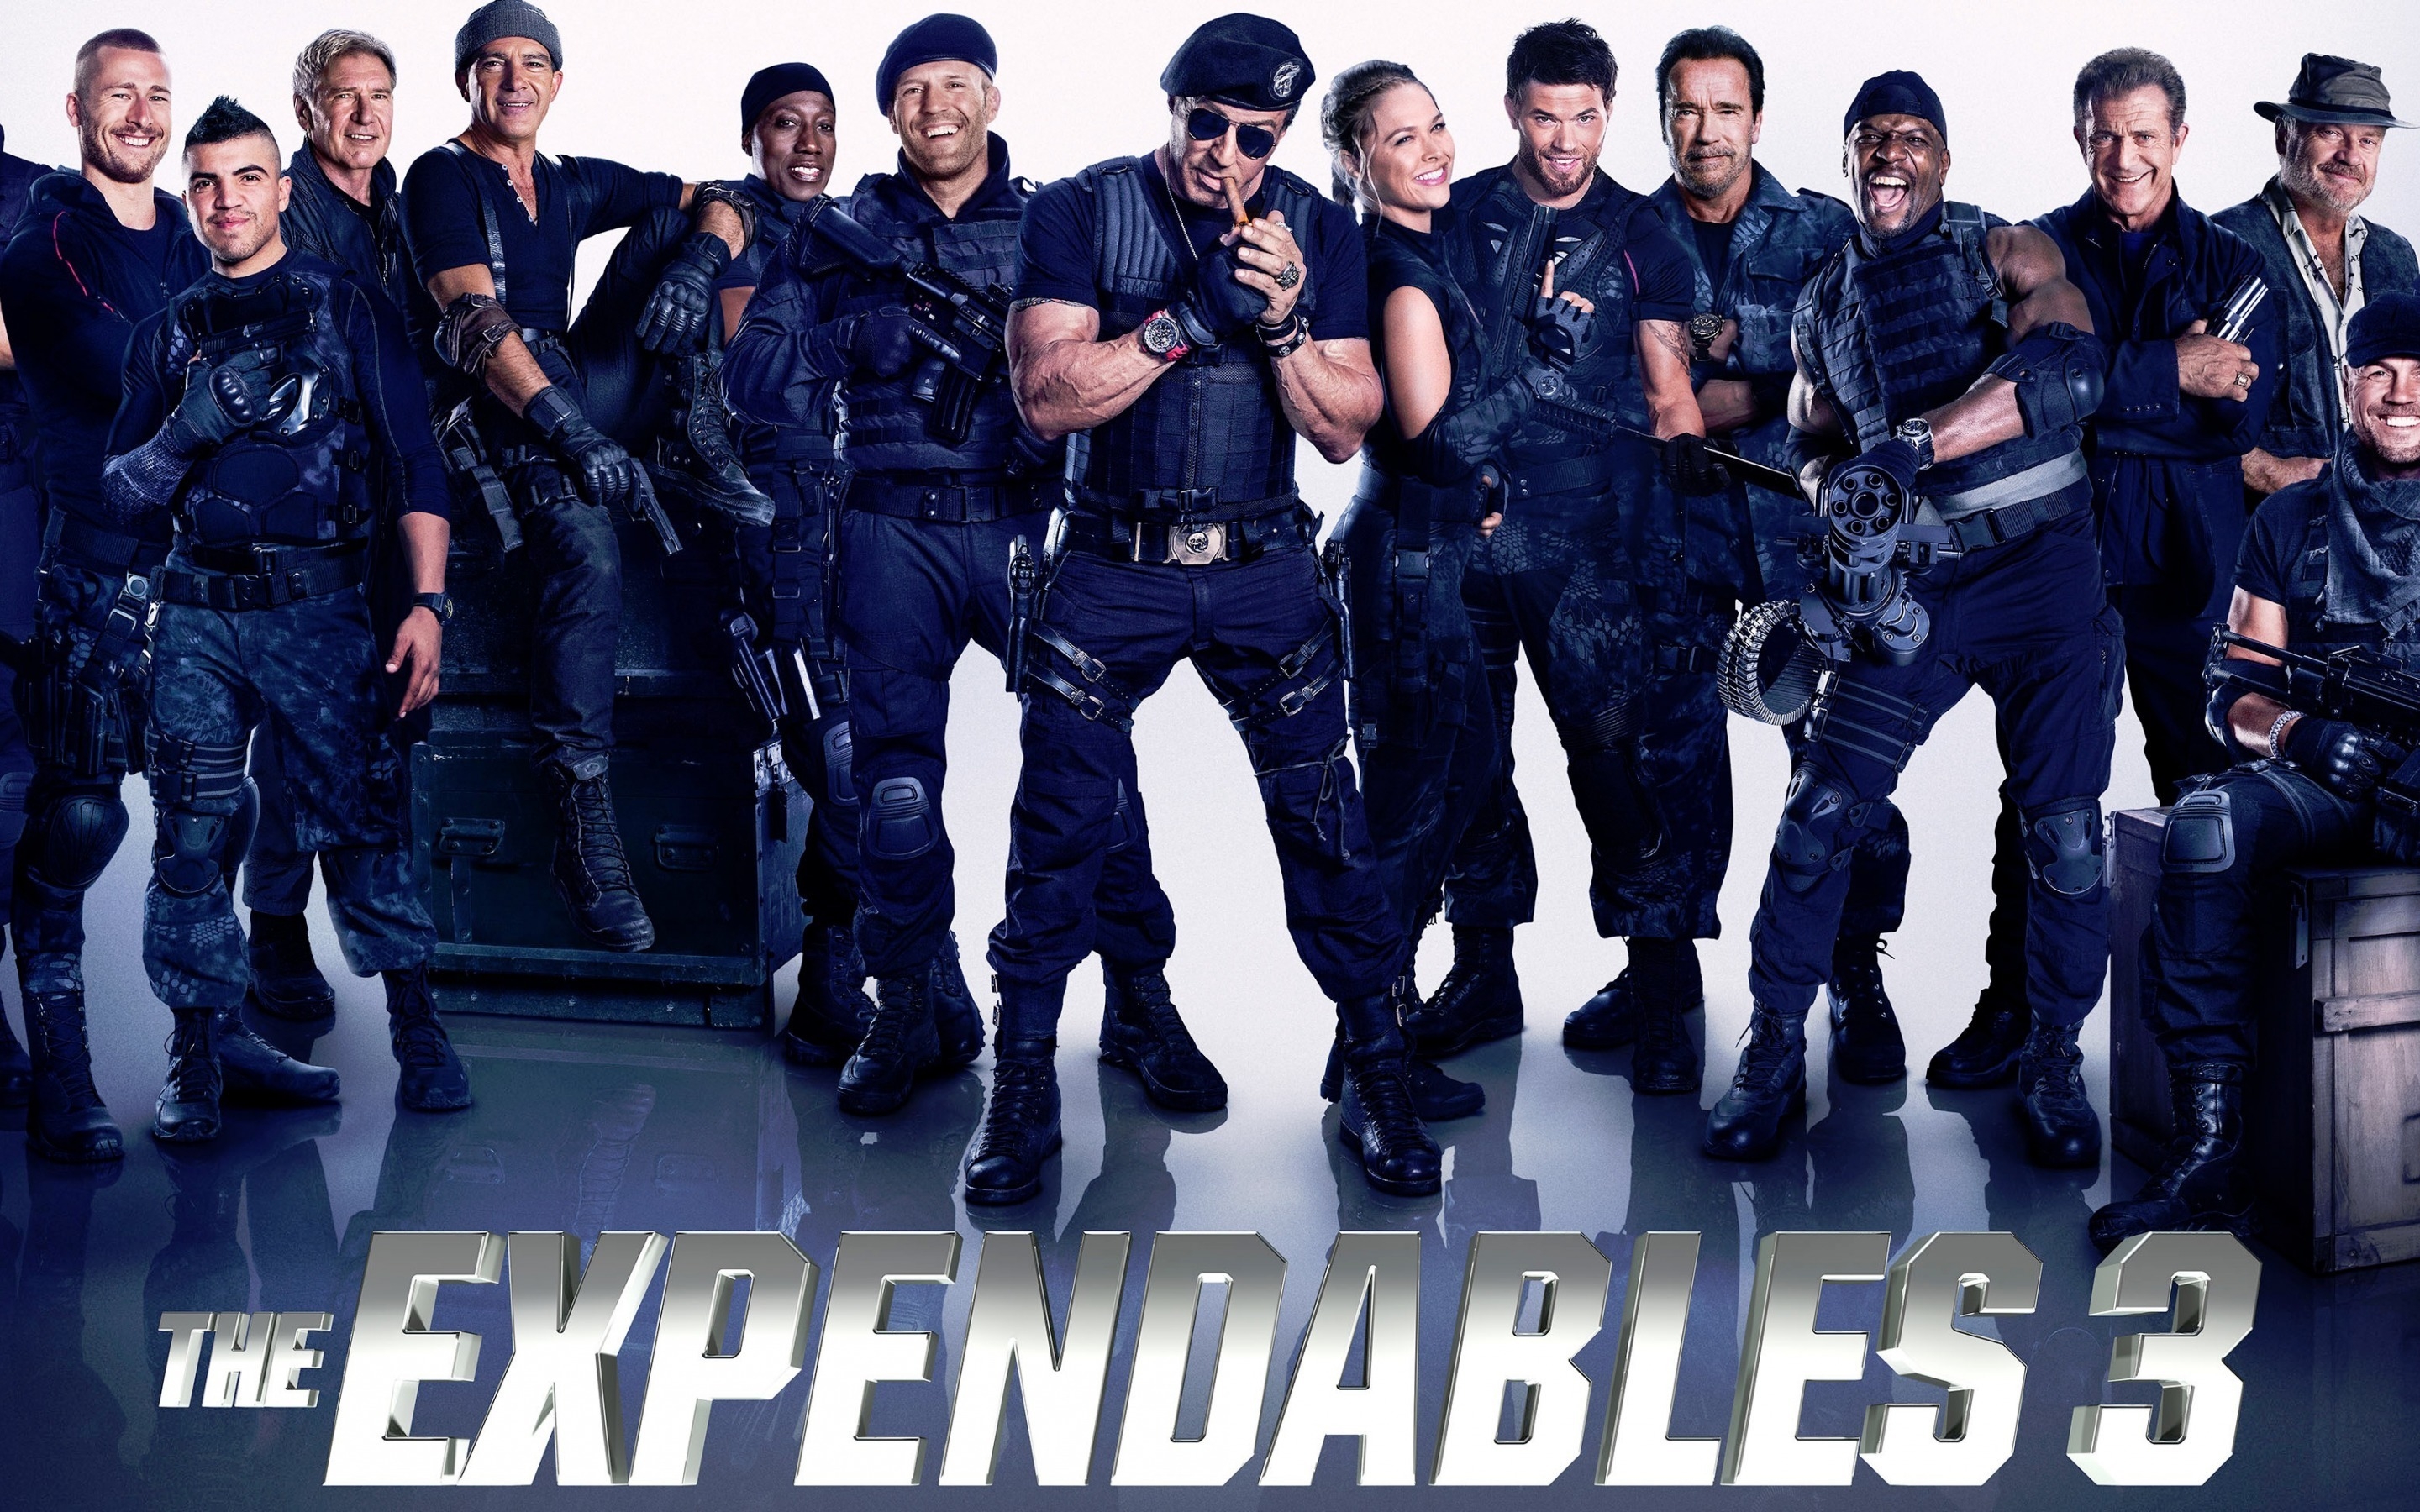 The Expendables 3 Poster for 2880 x 1800 Retina Display resolution